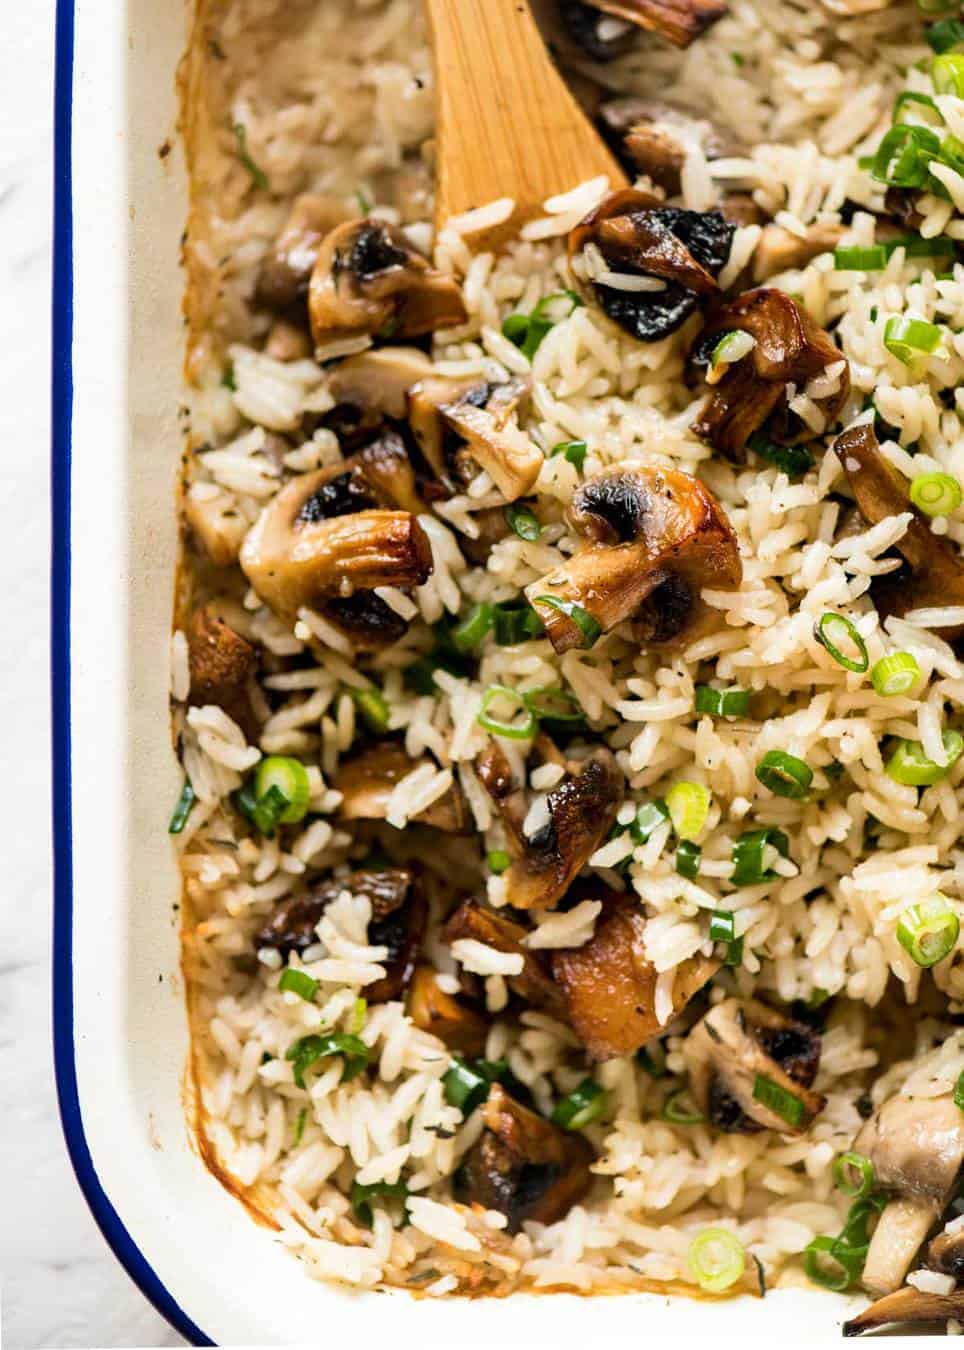 Baked Mushroom Rice - buttery, garlicky, golden brown juicy mushrooms and fluffy rice, all baked in one pan! recipetineats.com